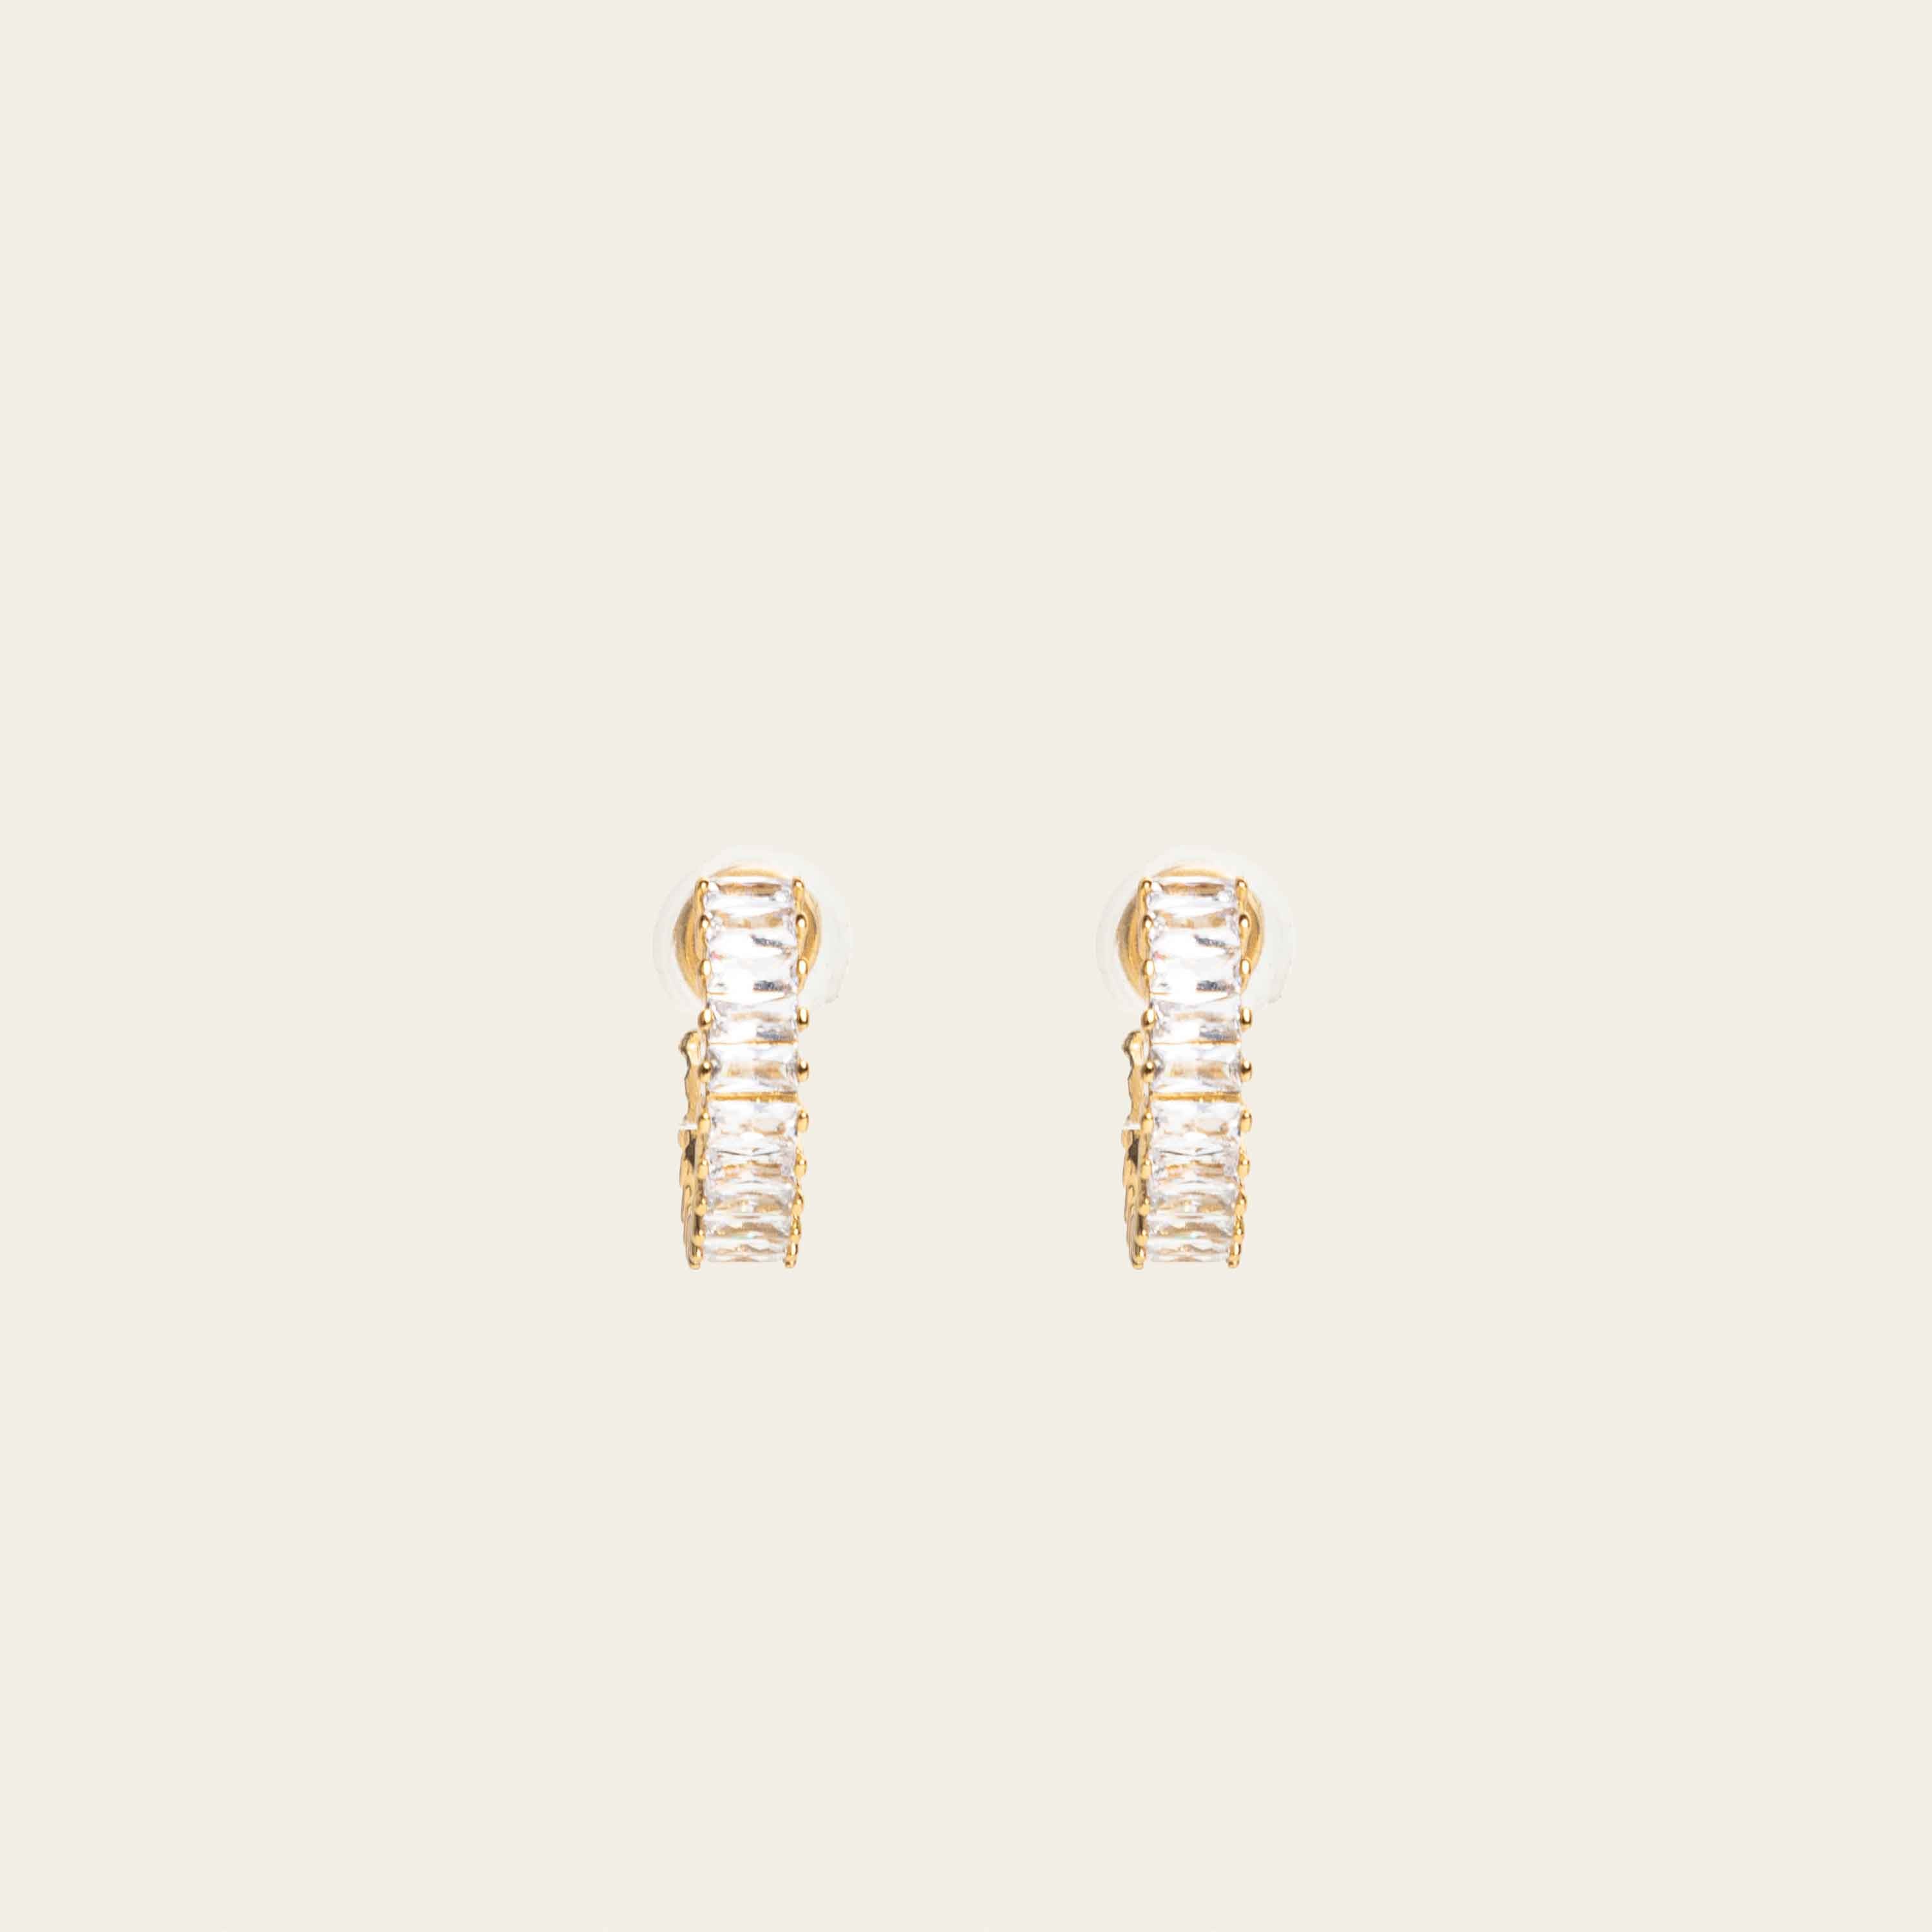 Image of the Olivia Clip On Earrings. These elegant earrings provide a secure 24-hour hold and adjustable fit for all types of ears, perfect for sensitive or stretched ears. Elevate your everyday look confidently with Olivia Clip On Earrings, designed for ultimate comfort and style.